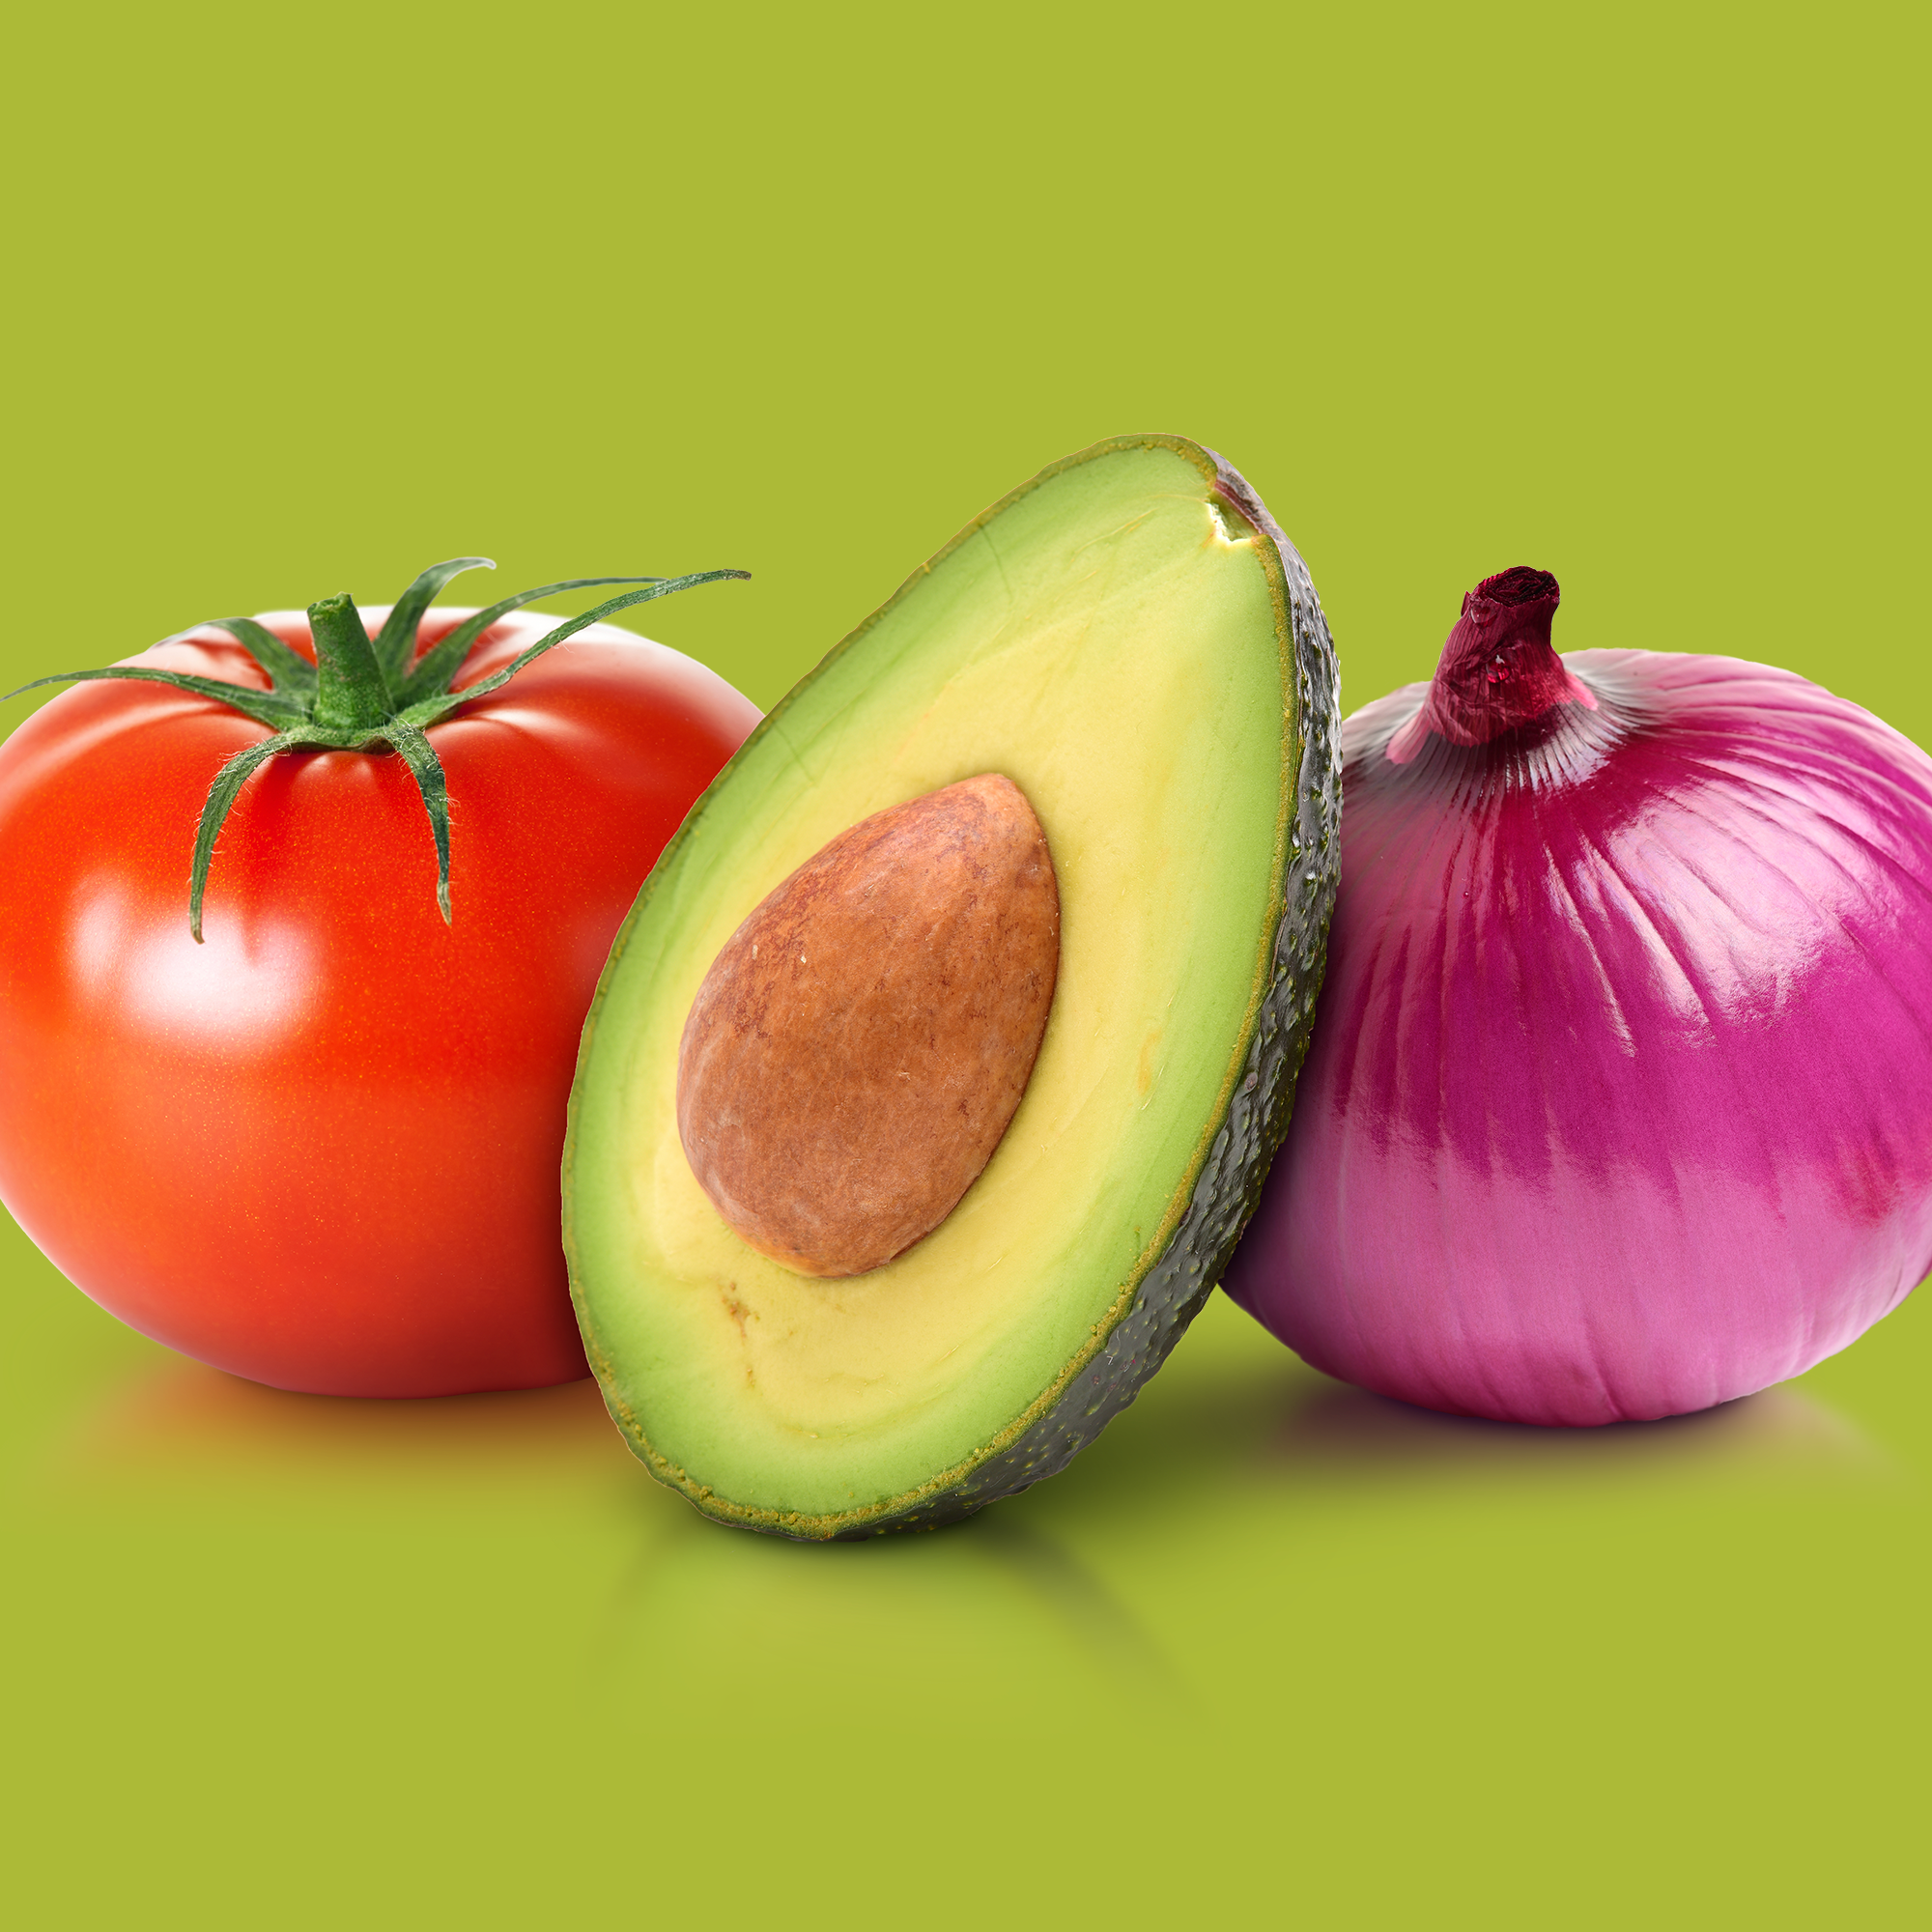 Tomato, avocado, and red onion on a green background